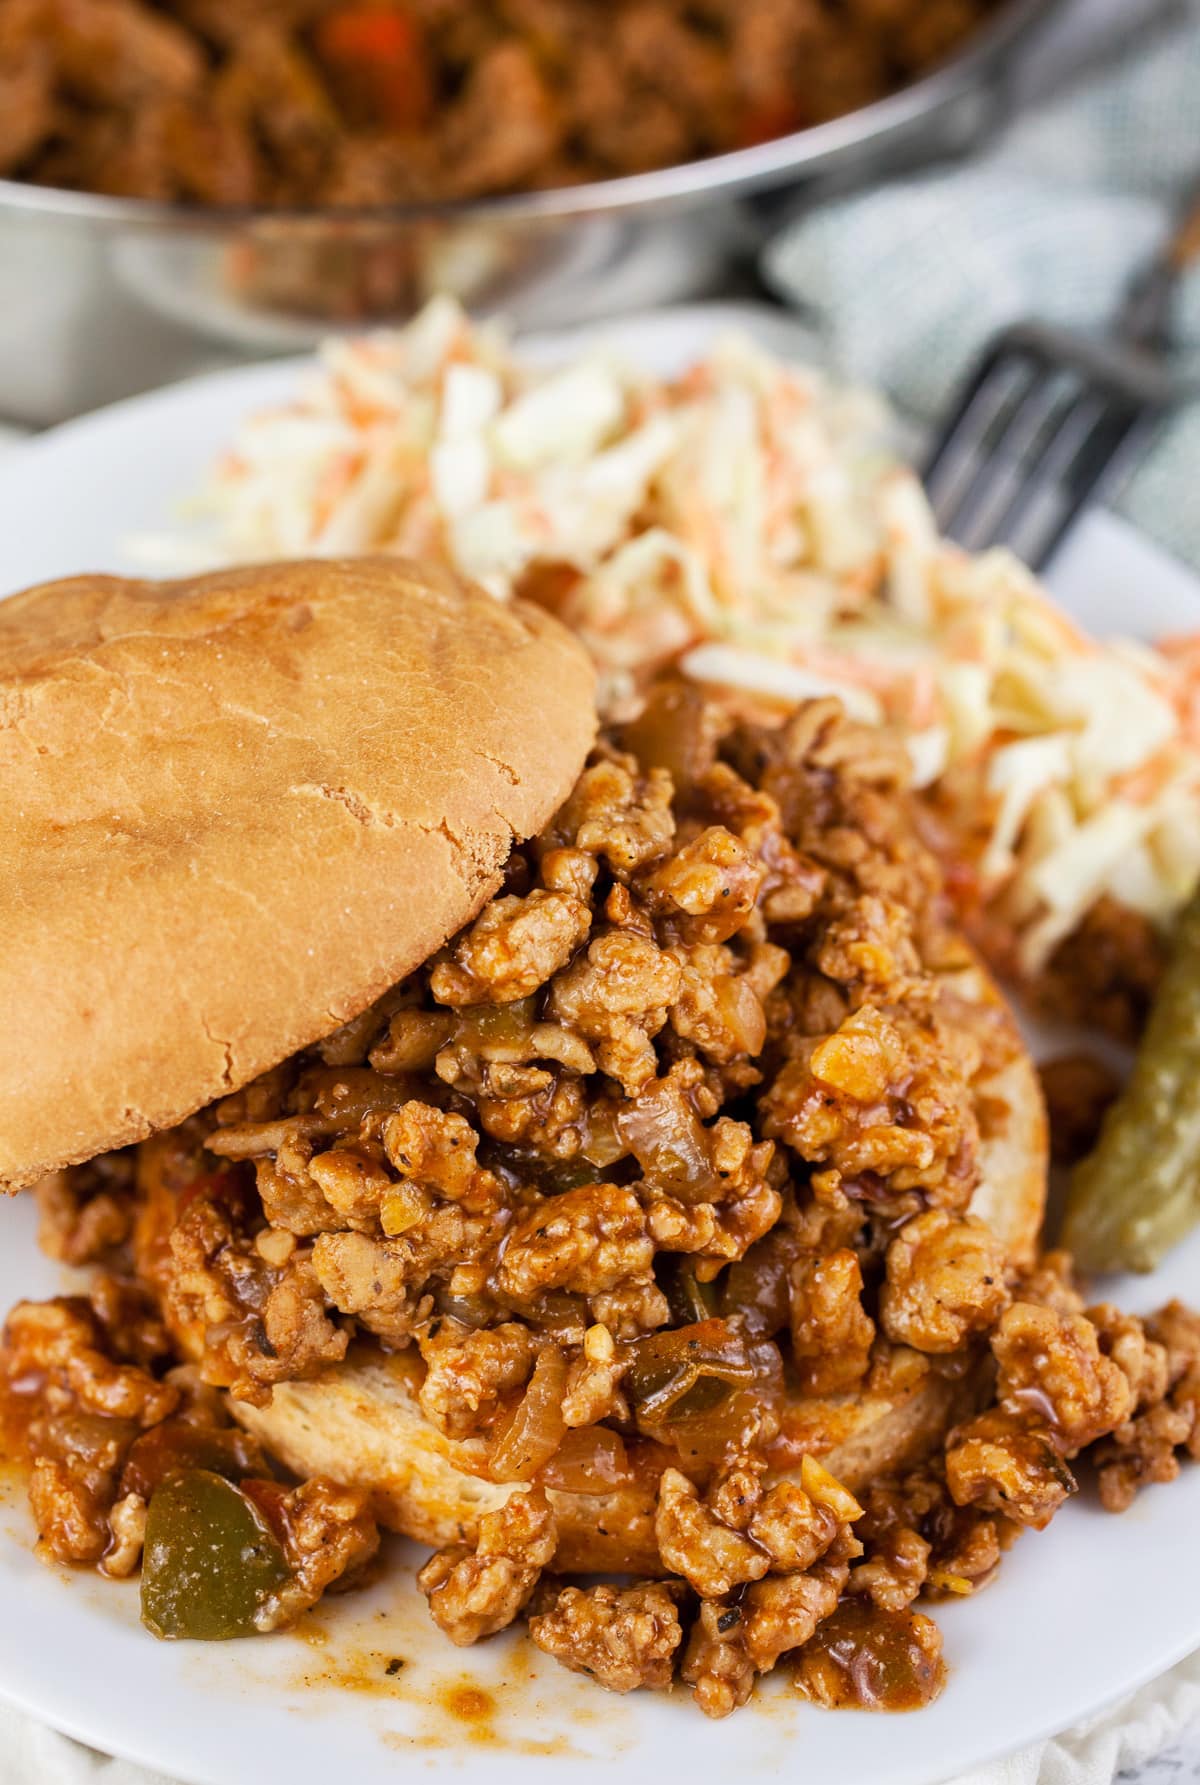 Ground chicken sloppy joes on a plate with coleslaw.